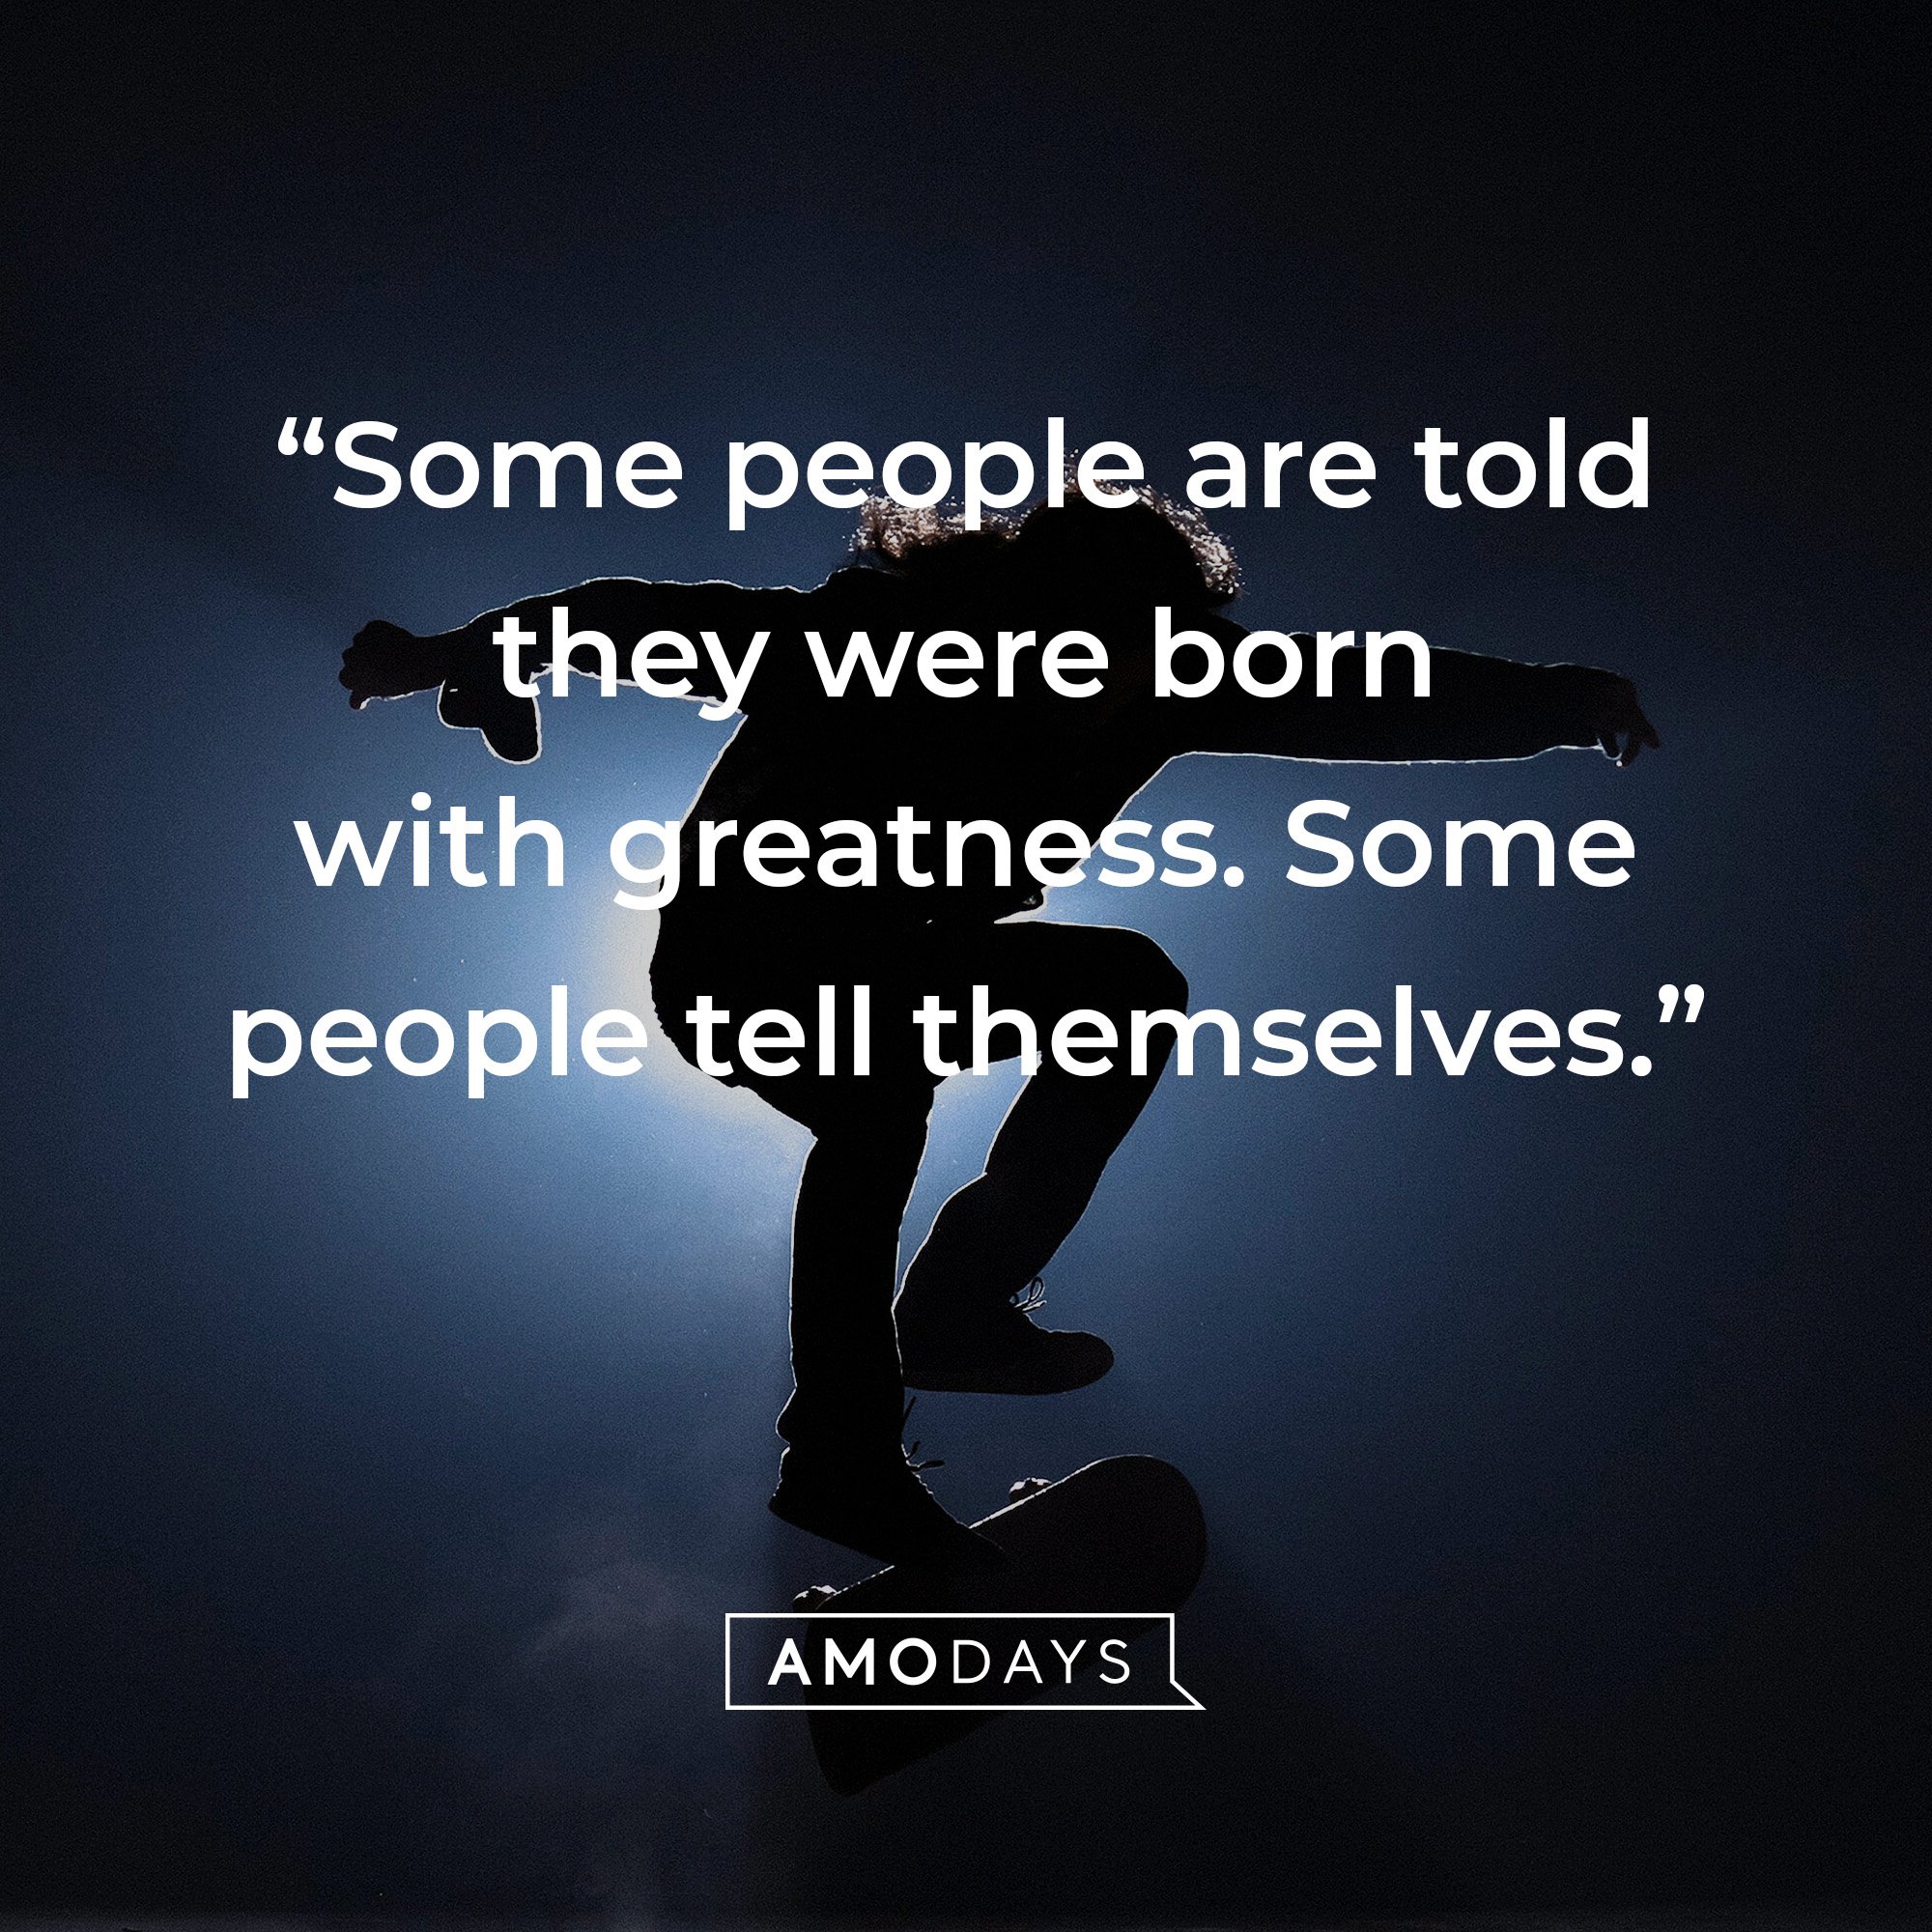 Nike’s quote: “Some people are told they were born with greatness. Some people tell themselves.” | Source: AmoDays